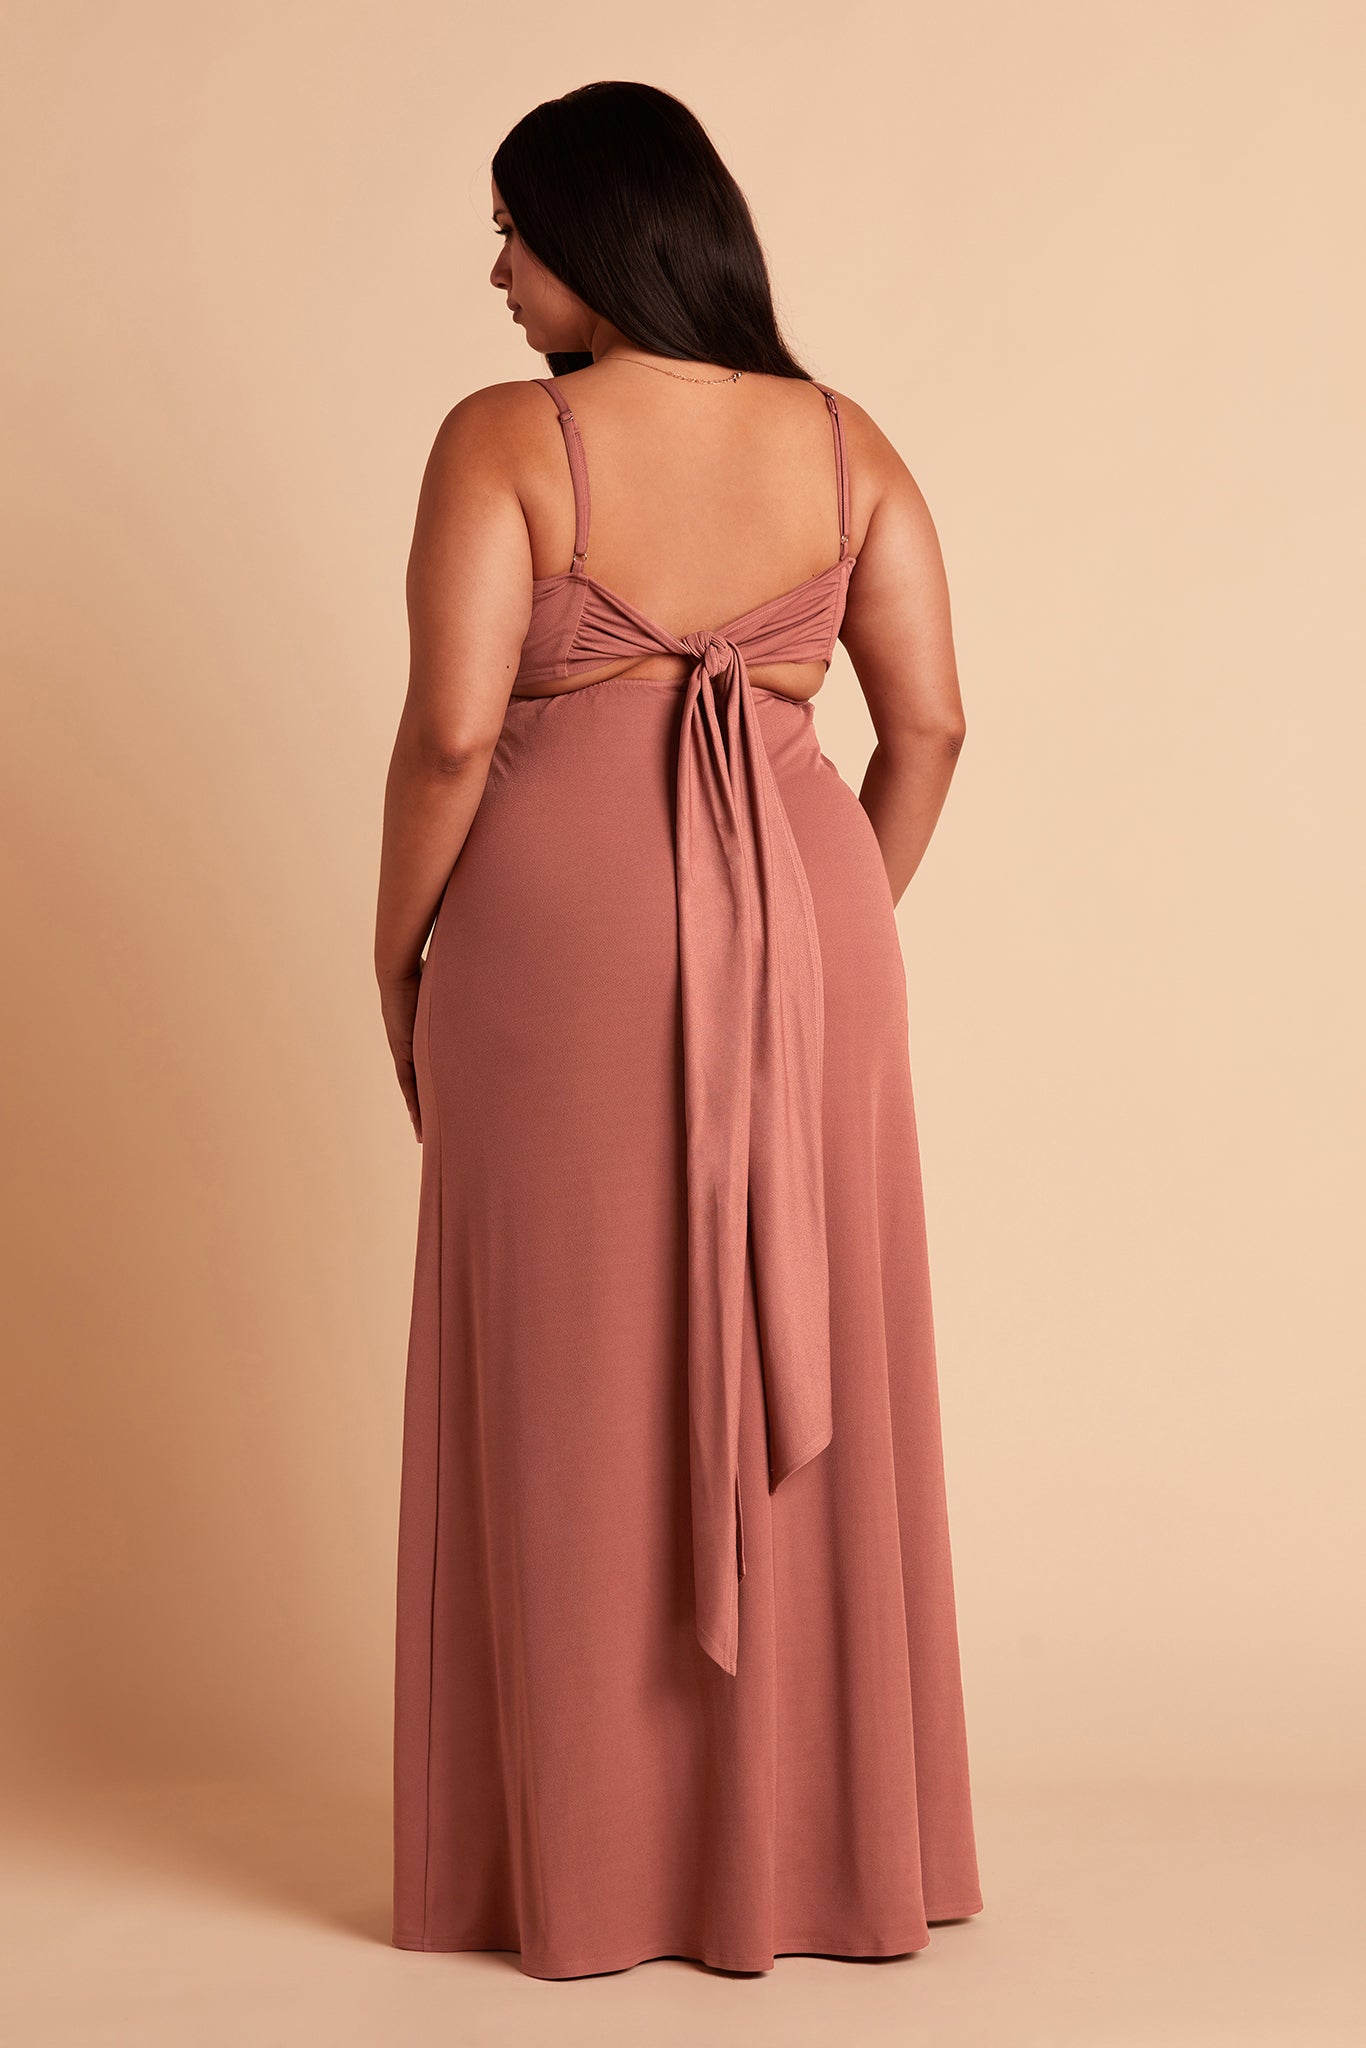 Benny plus size bridesmaid dress with slit in desert rose crepe by Birdy Grey, back view